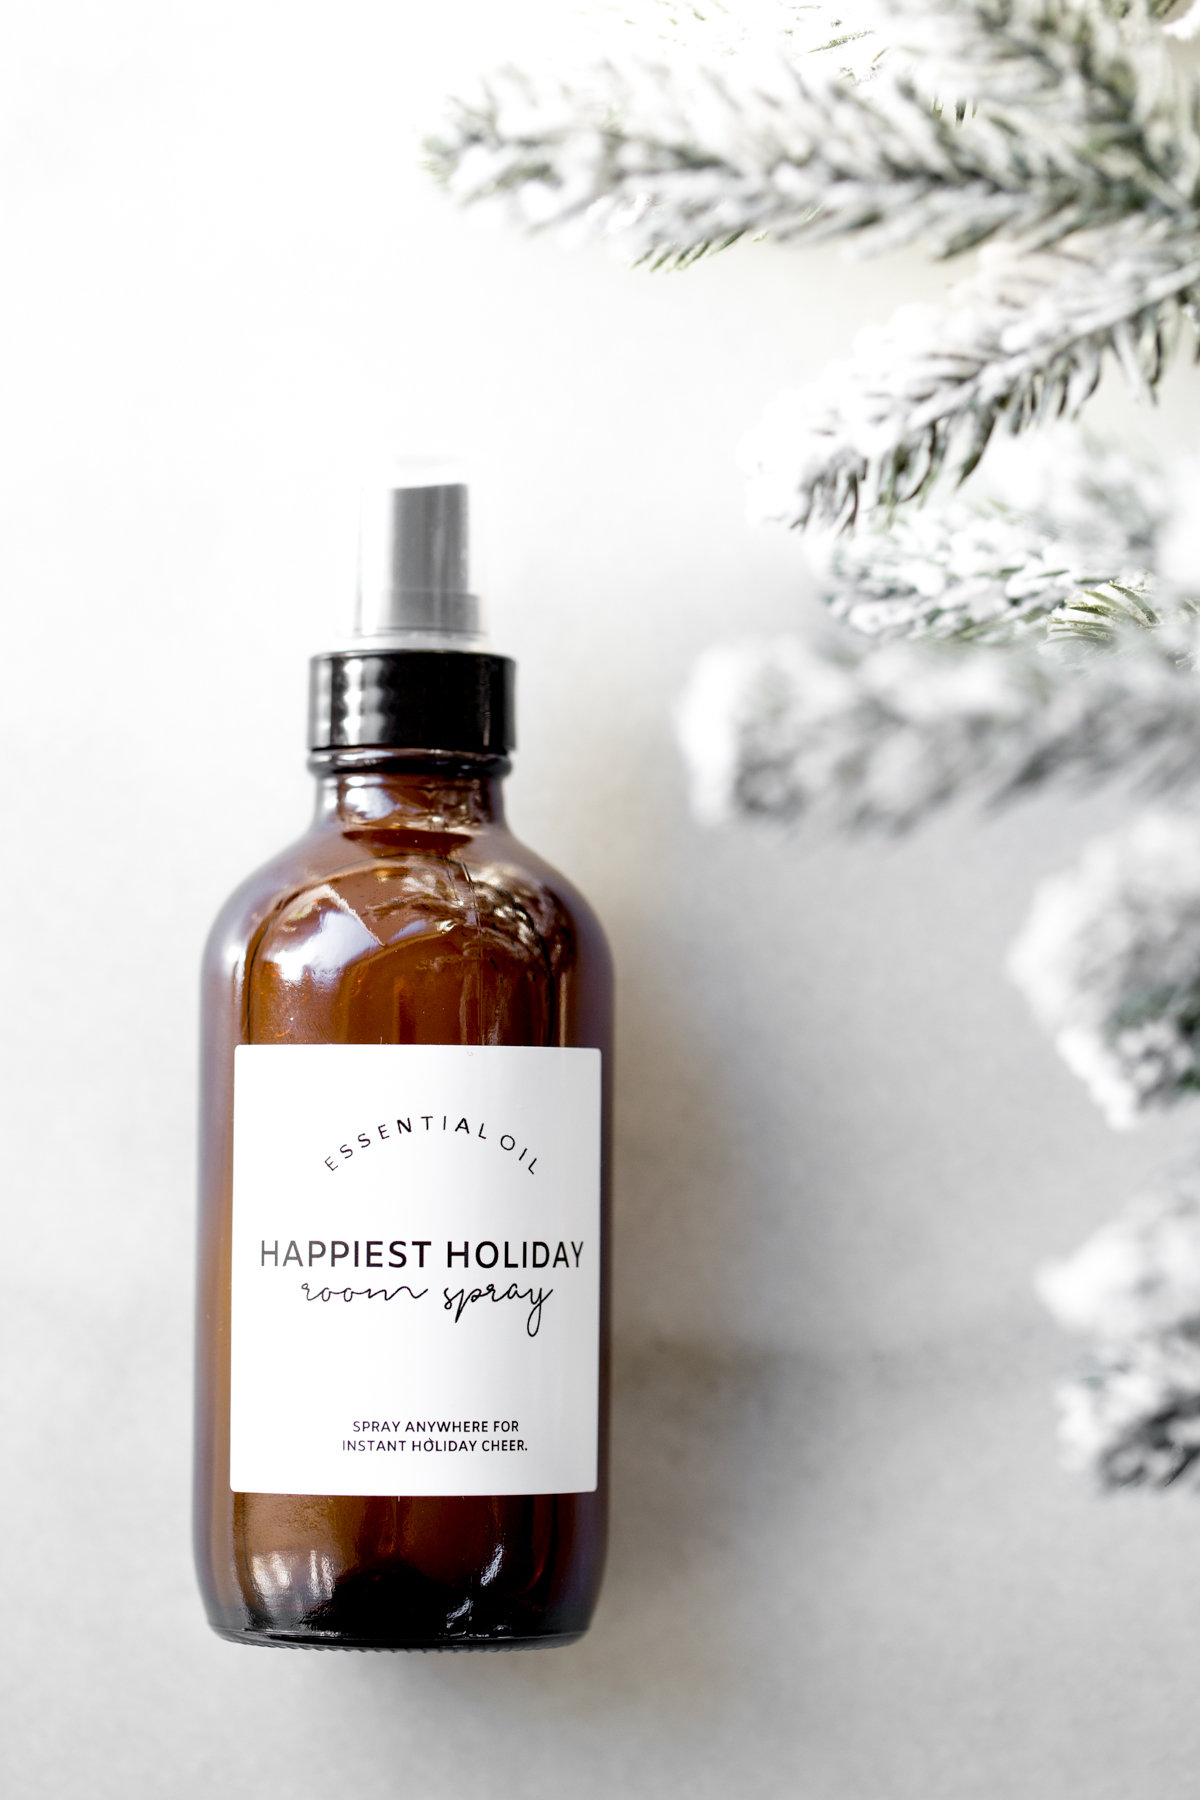 Bottle of holiday room spray on marble background with snow covered tree branches on the side